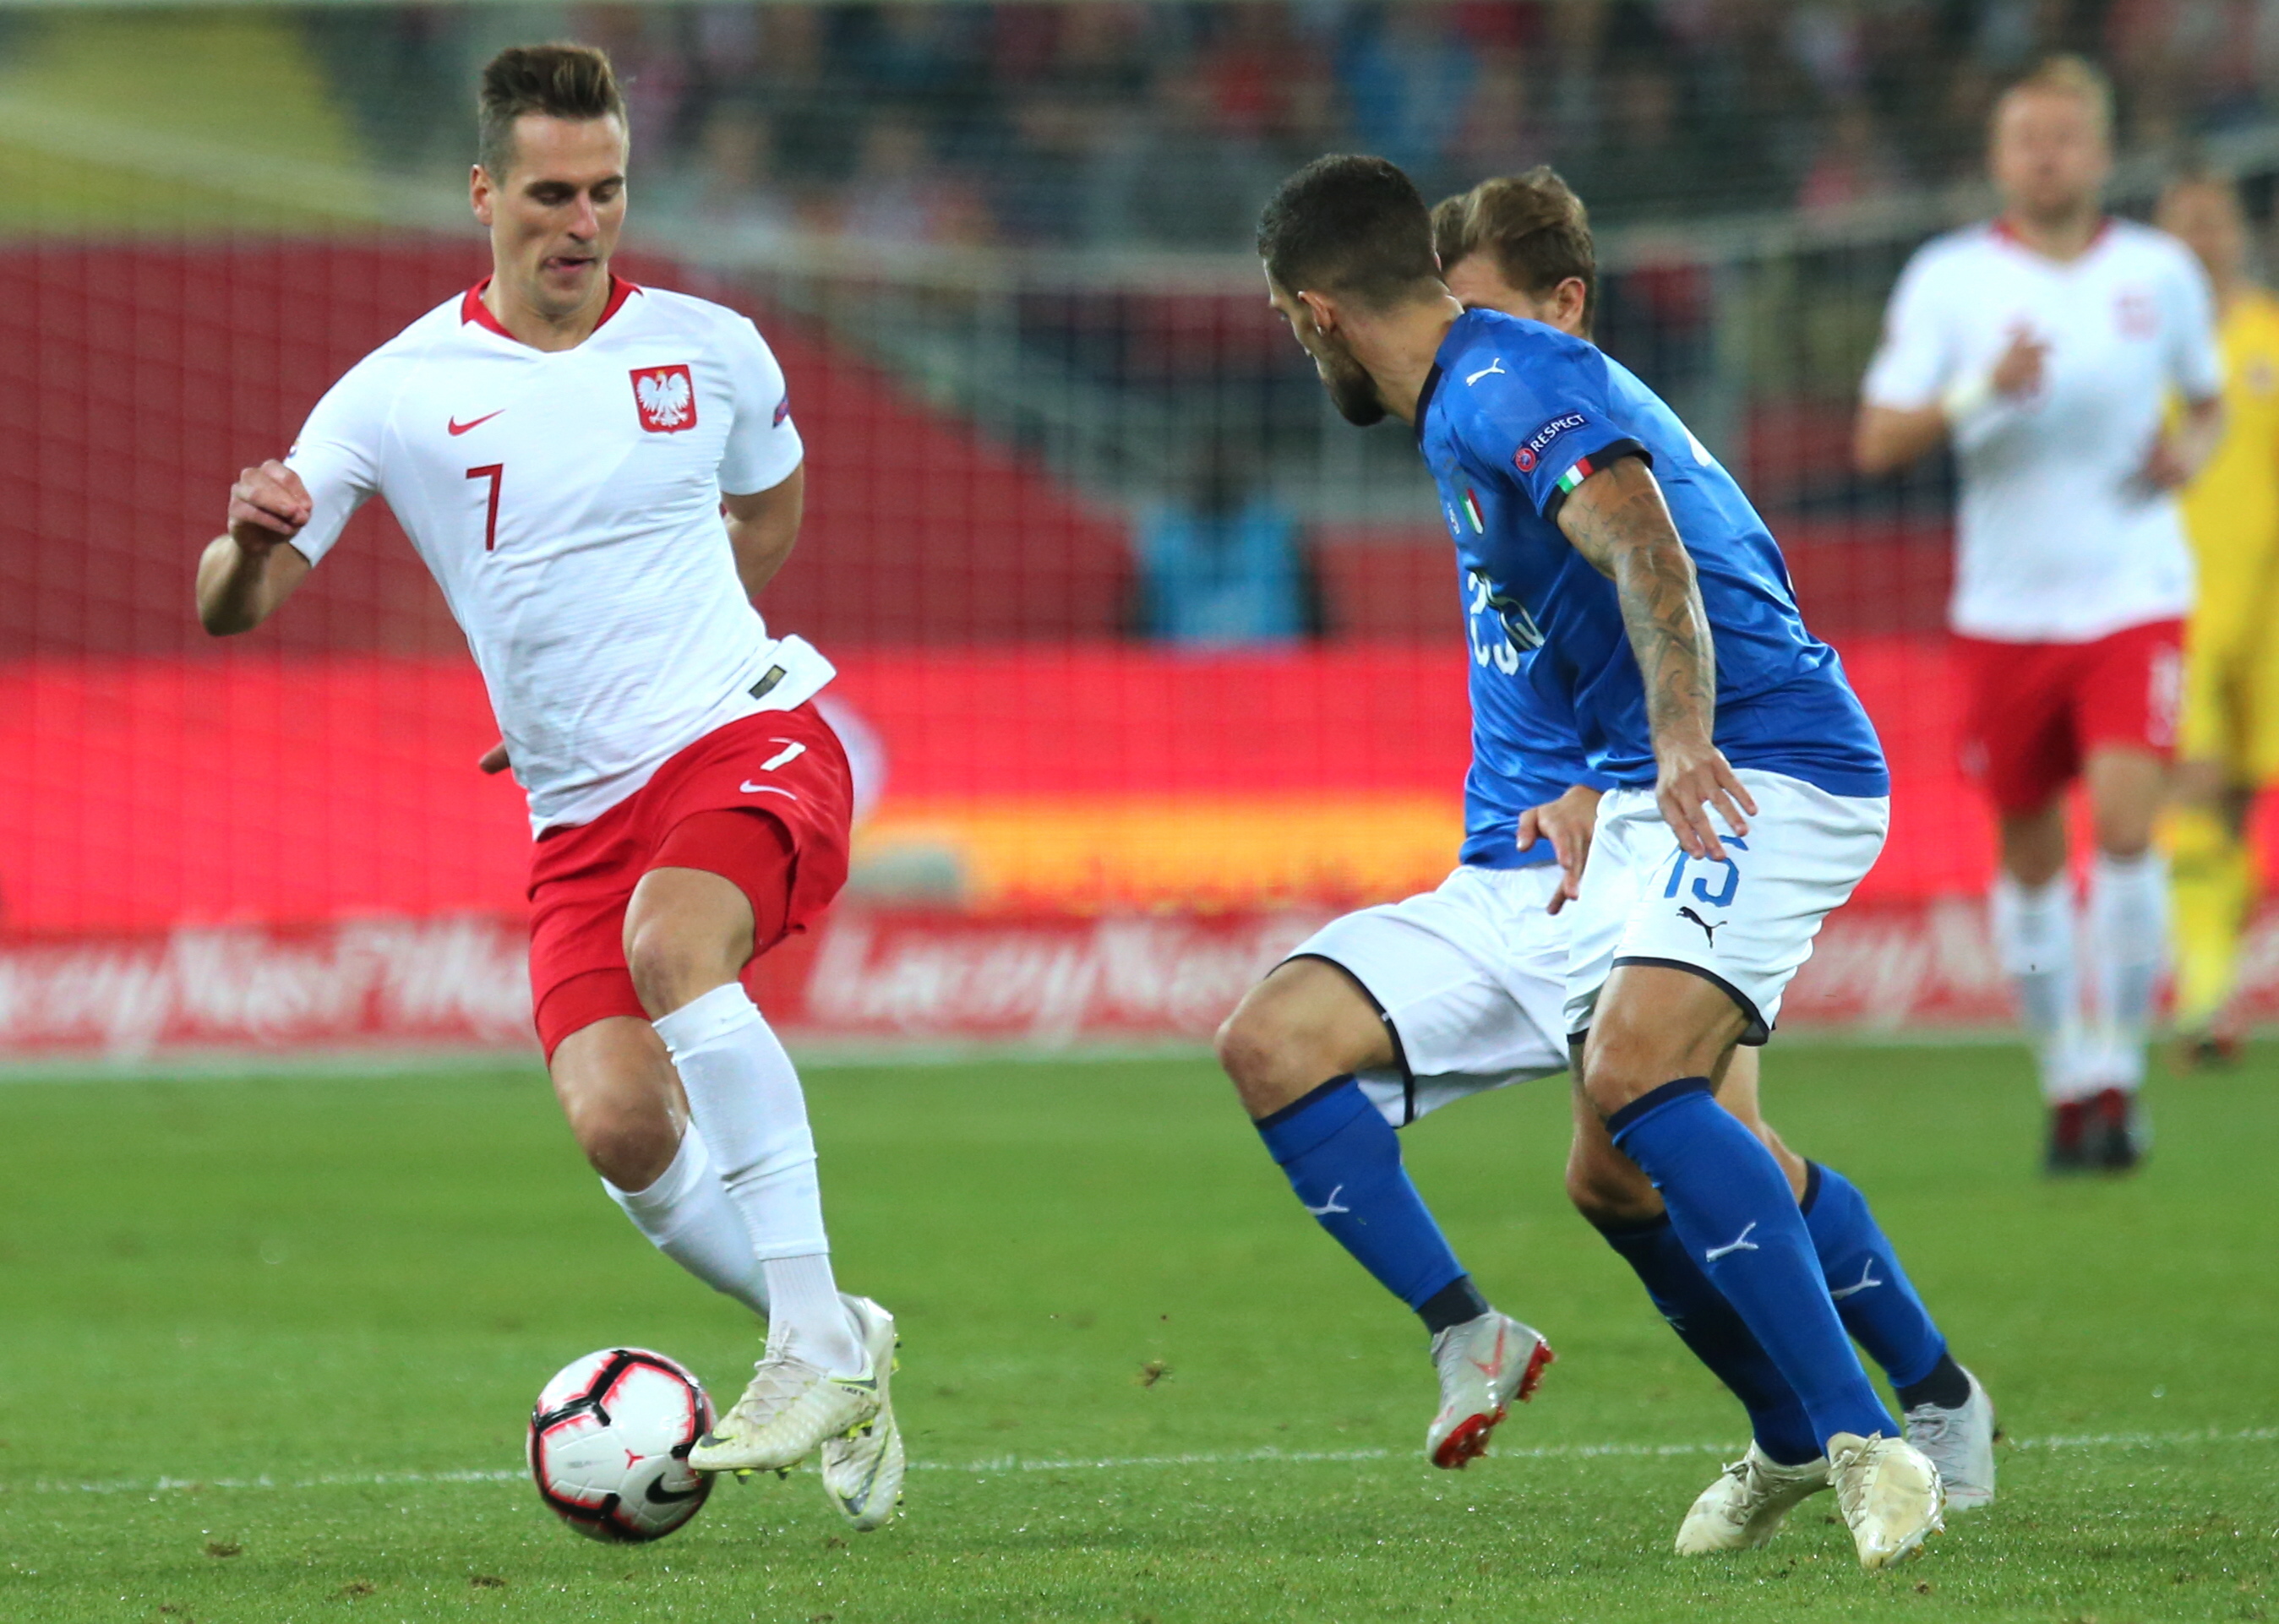 epa07093502 Arkadiusz Milik (L) of Poland in action against Cristiano Biraghi (R) of Italy during the UEFA Nations League soccer match between Poland and Italy, in Chorzow, Poland, 14 October 2018.  EPA/Andrzej Grygiel POLAND OUT